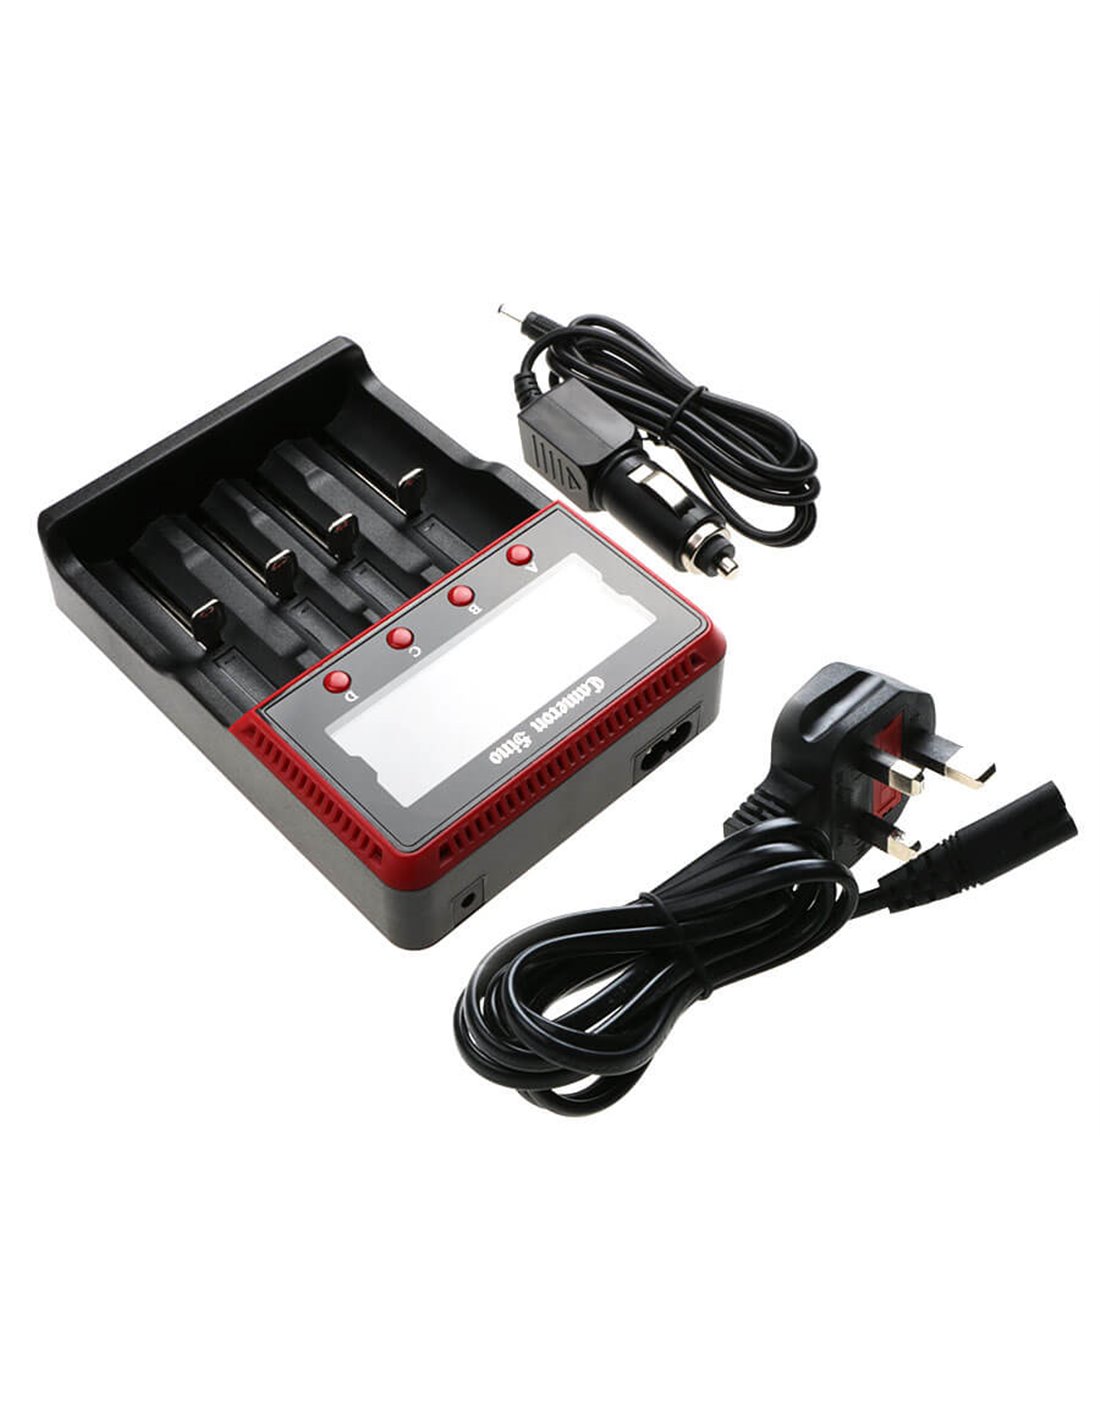 Mains Four Slot Charger for AA, AAA 18650 Charges NiMh & Lithium Ion Cells UK Plug